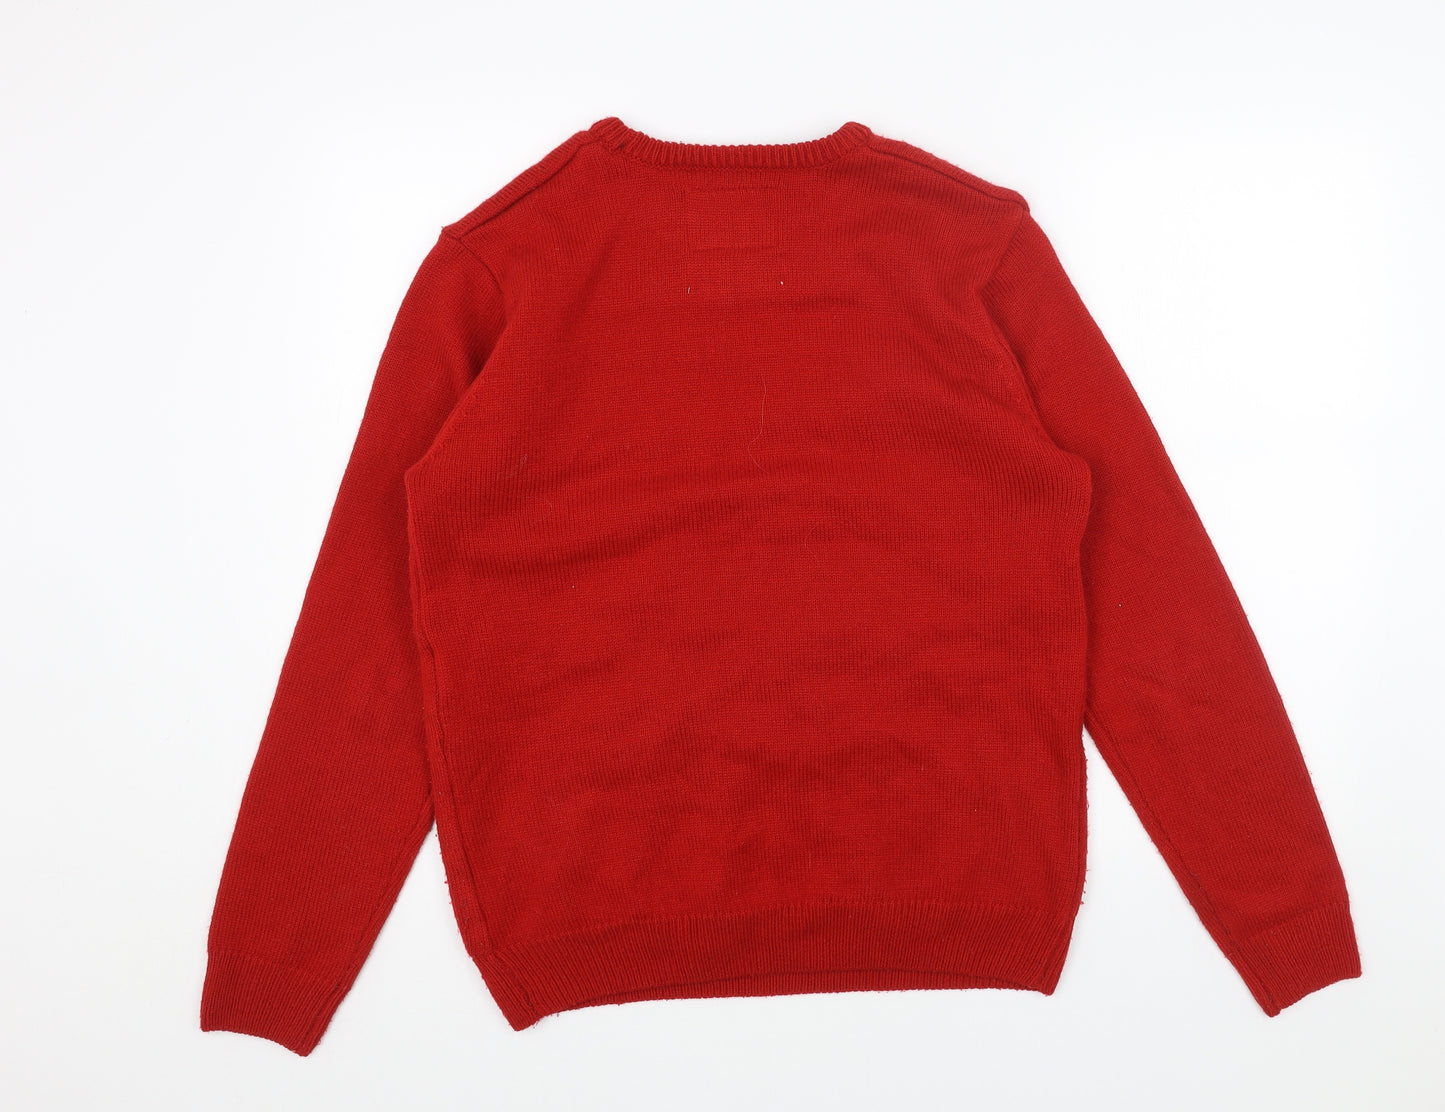 Cedar Wood State Mens Red Round Neck Acrylic Pullover Jumper Size M Long Sleeve - Christmas Pudding